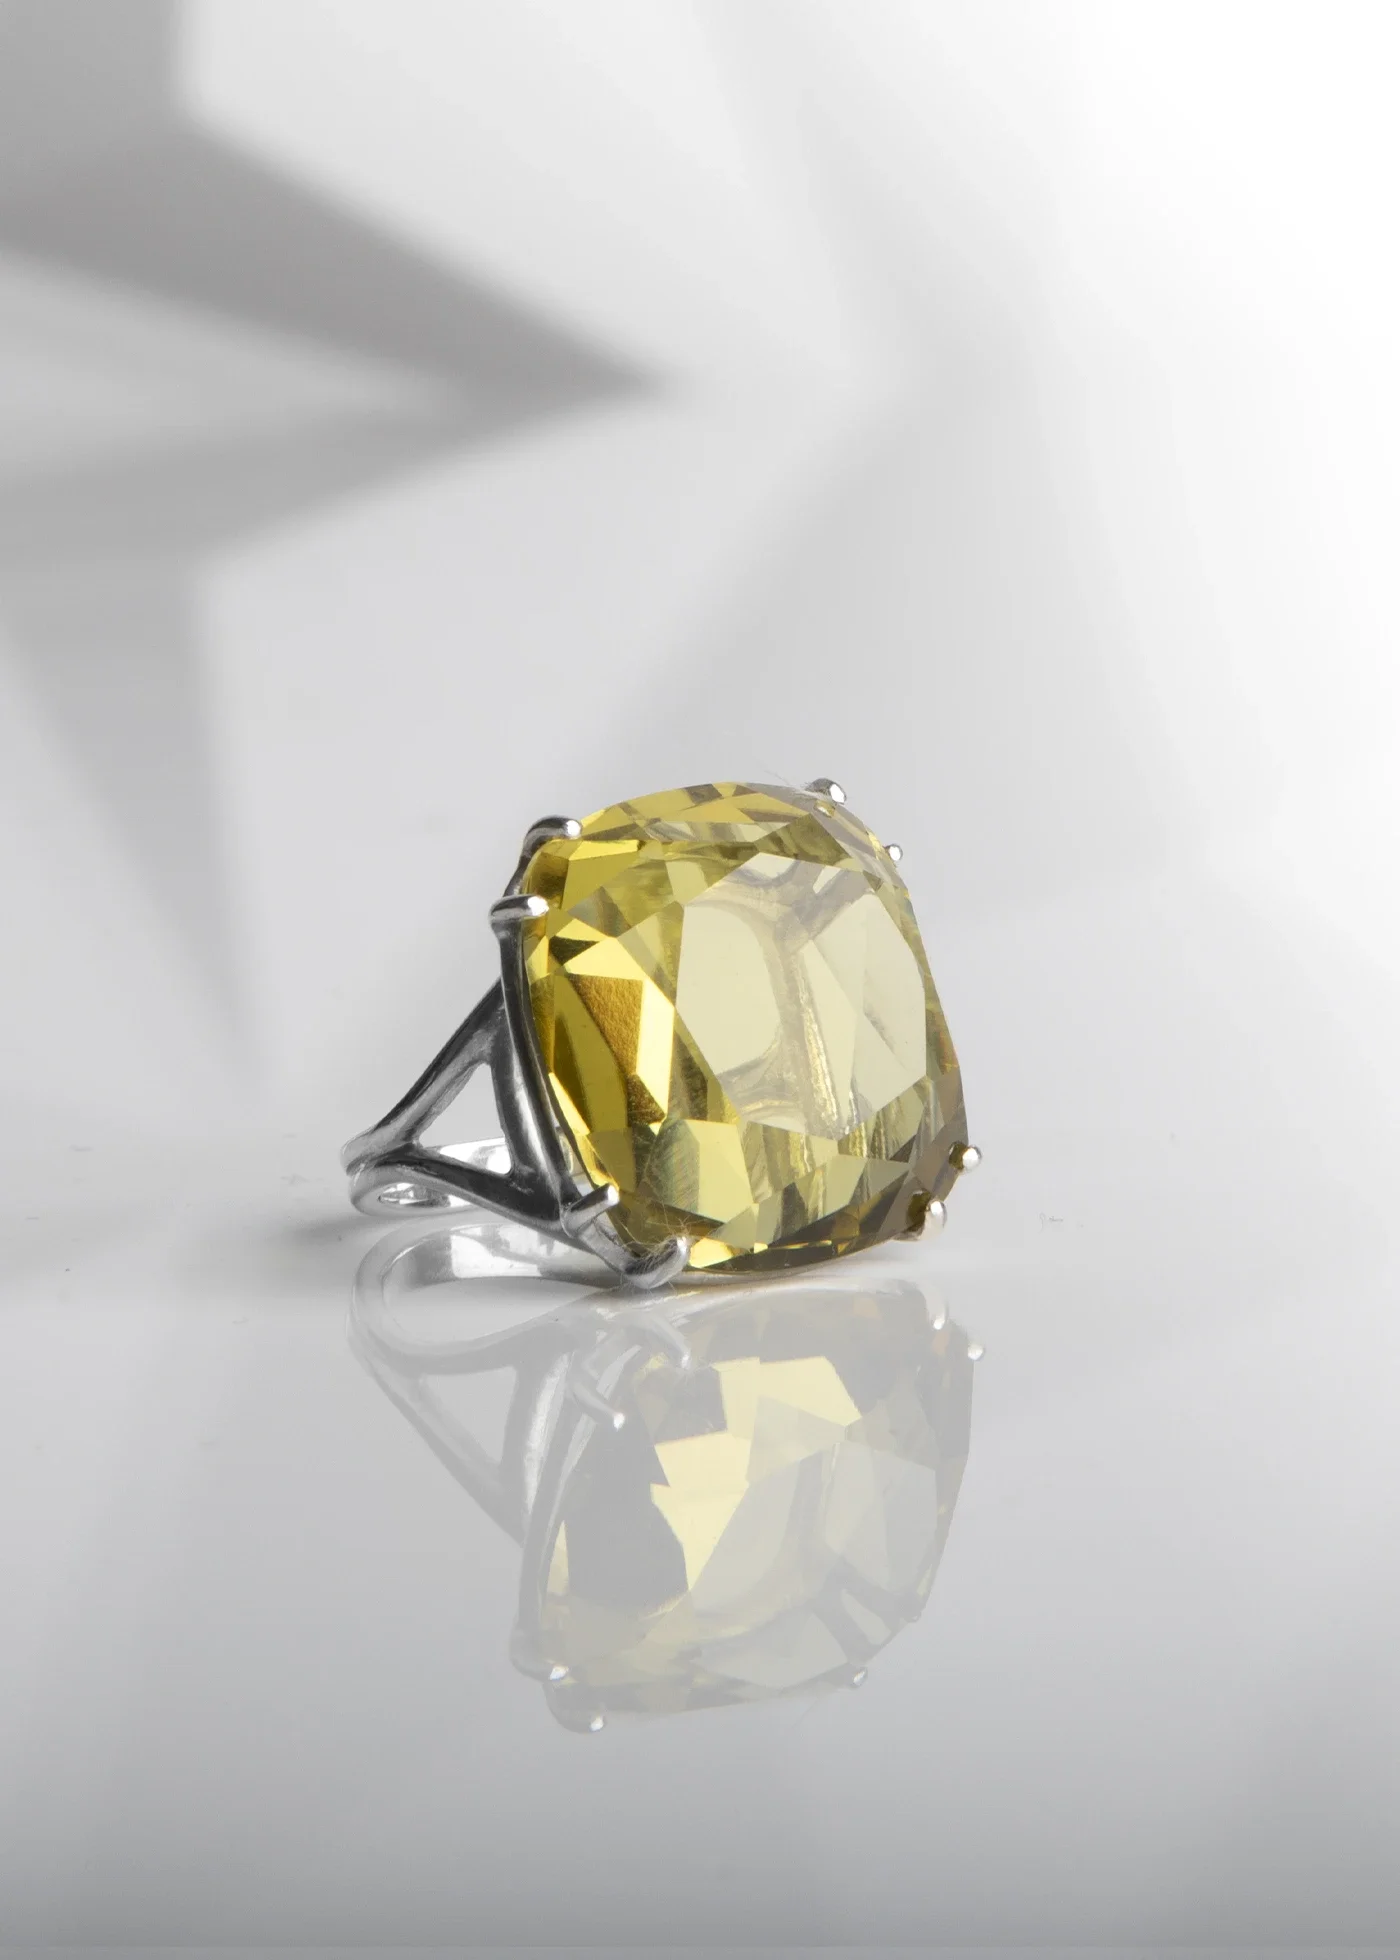 Lime Citrine Sterling Cocktail Ring, 34 Carat Cushion Cut